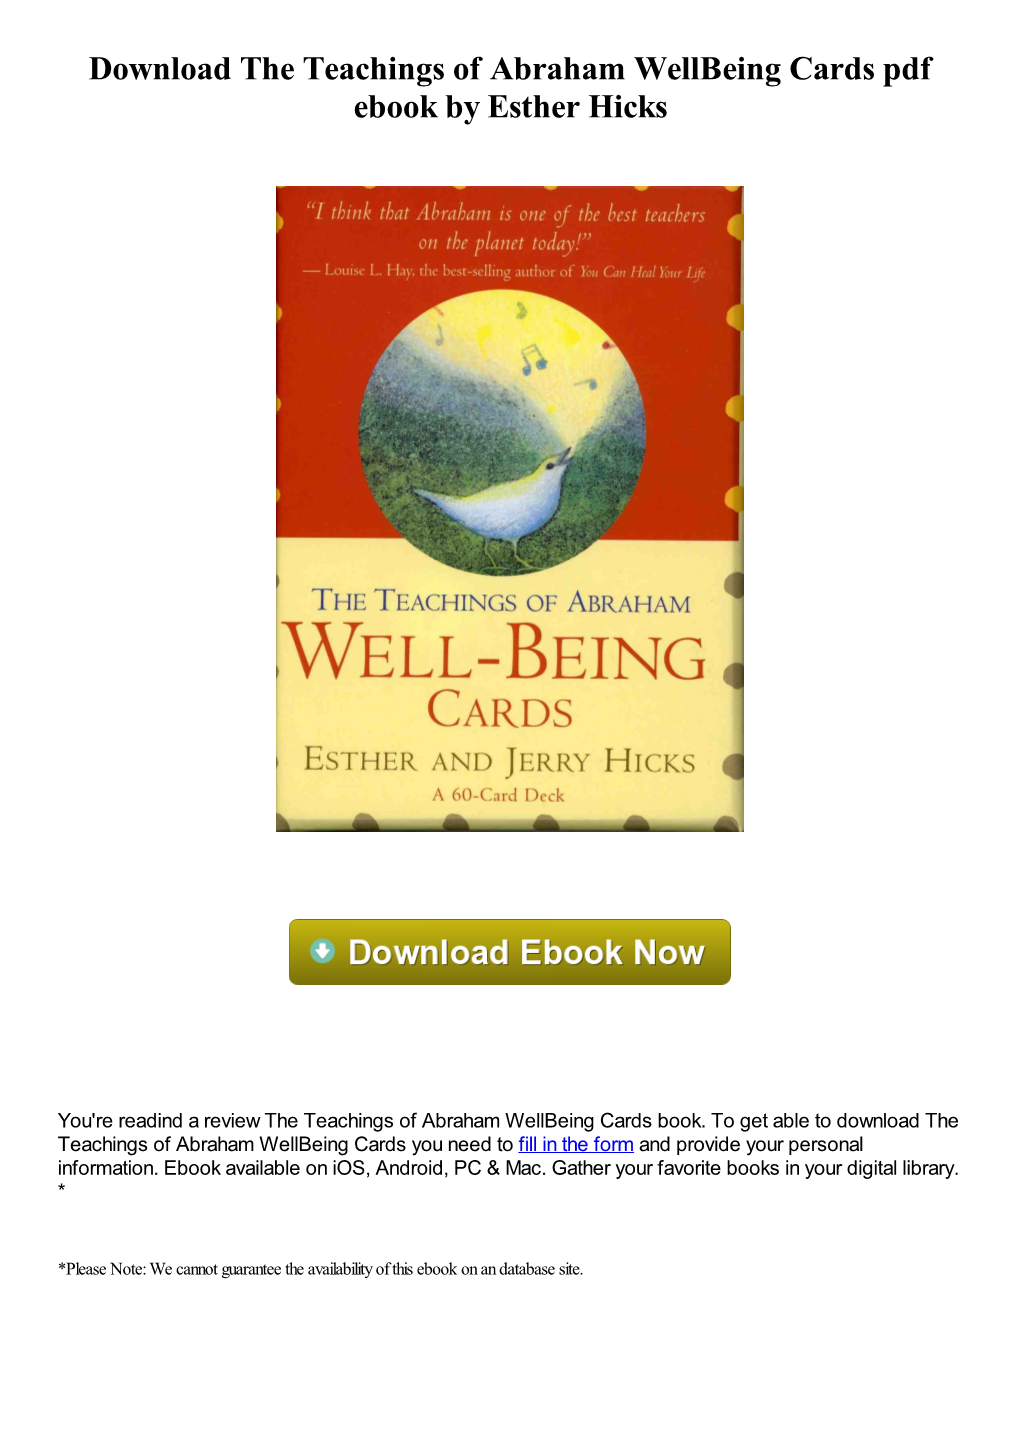 Download the Teachings of Abraham Wellbeing Cards Pdf Book By